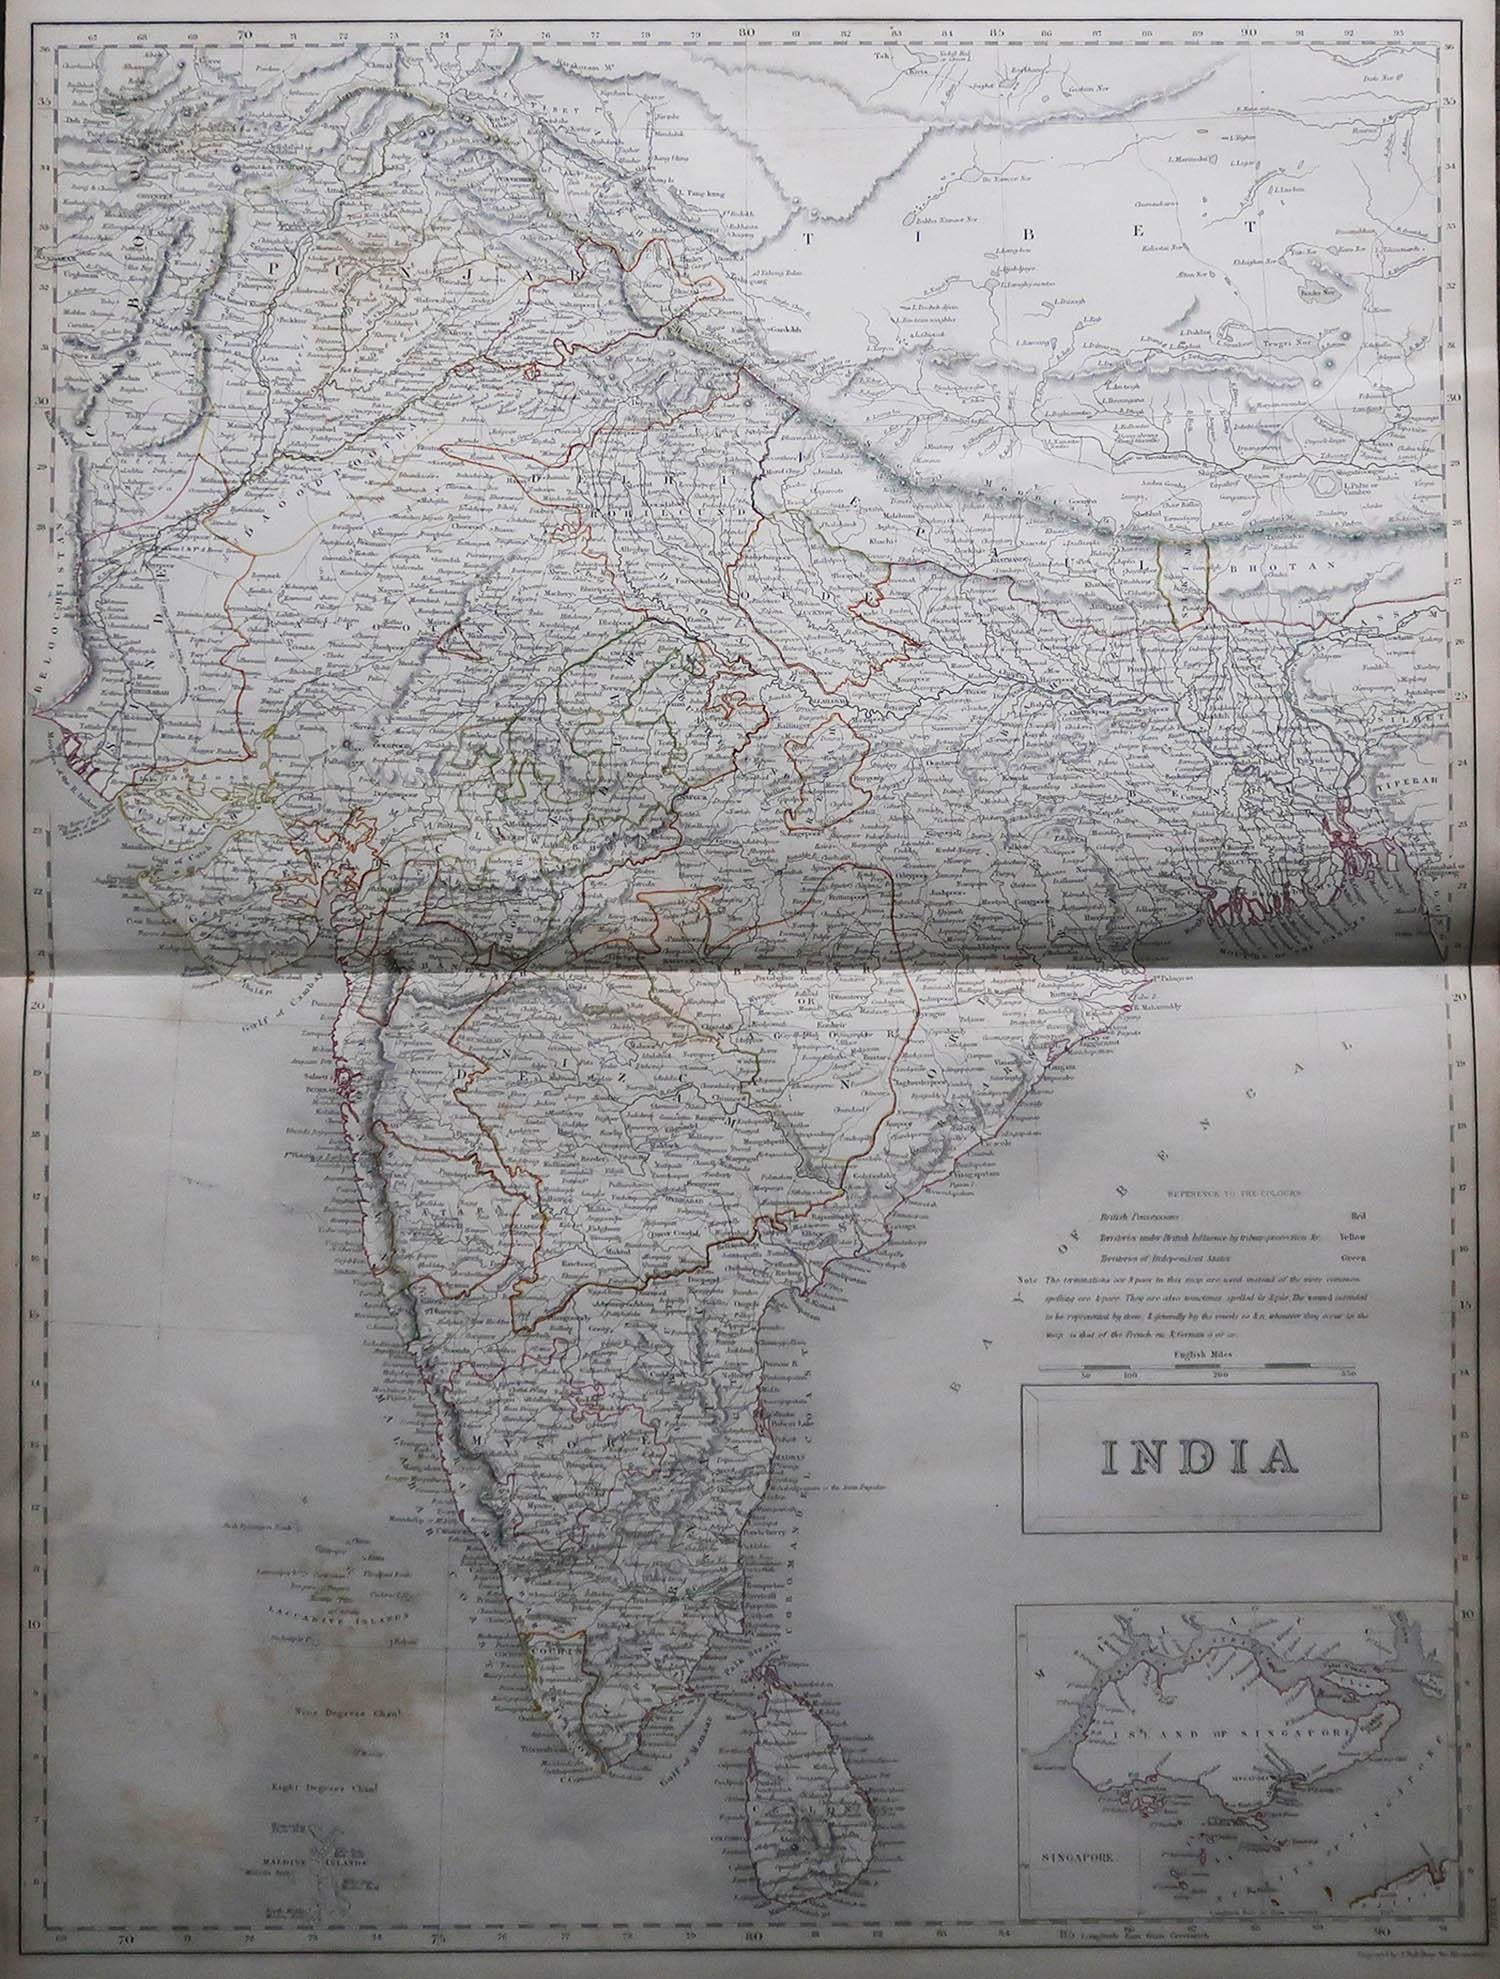 Great map of India

Drawn and engraved by Sidney Hall

Steel engraving 

Original colour outline

Published by A & C Black. 1847

Some foxing bottom left corner area

Unframed

Free shipping.

